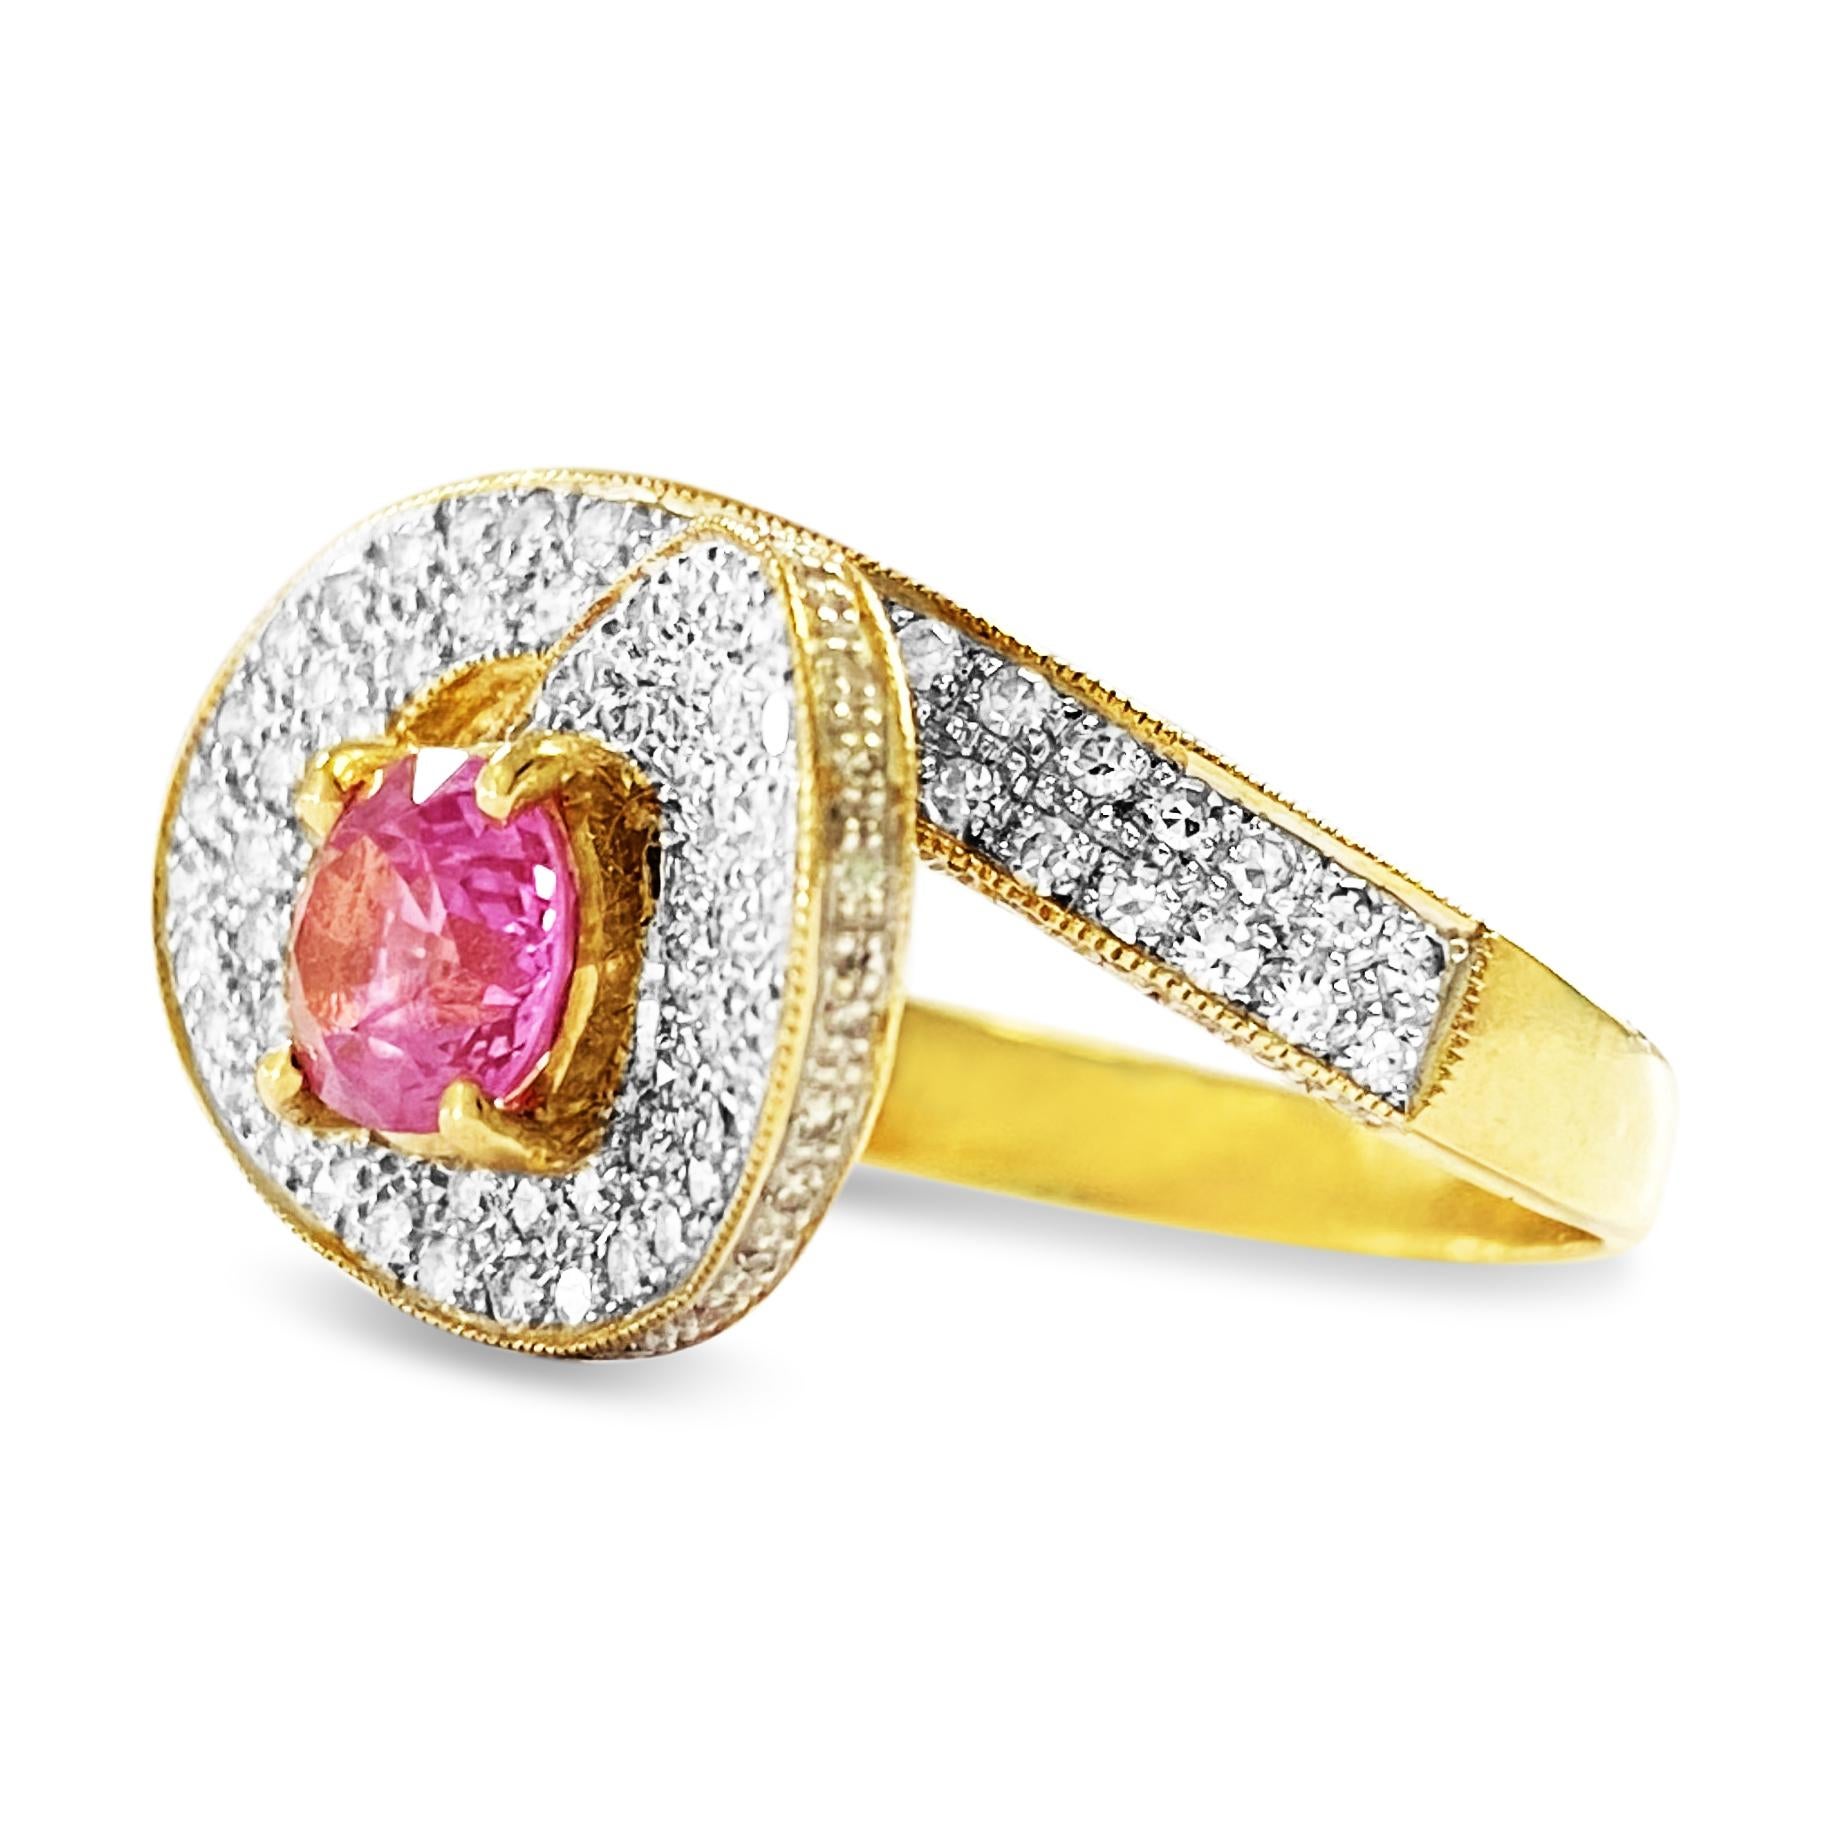 Metal: 18K Yellow Gold
Diamonds: 1.50 Carat Weight Total
VS clarity. G-H color. 100% natural earth mined. 

1.50 carat pink sapphire. Oval shape. 
100% natural earth mined. 

Total carat weight of all stones: 3.00 carats. 

Beautiful diamond and